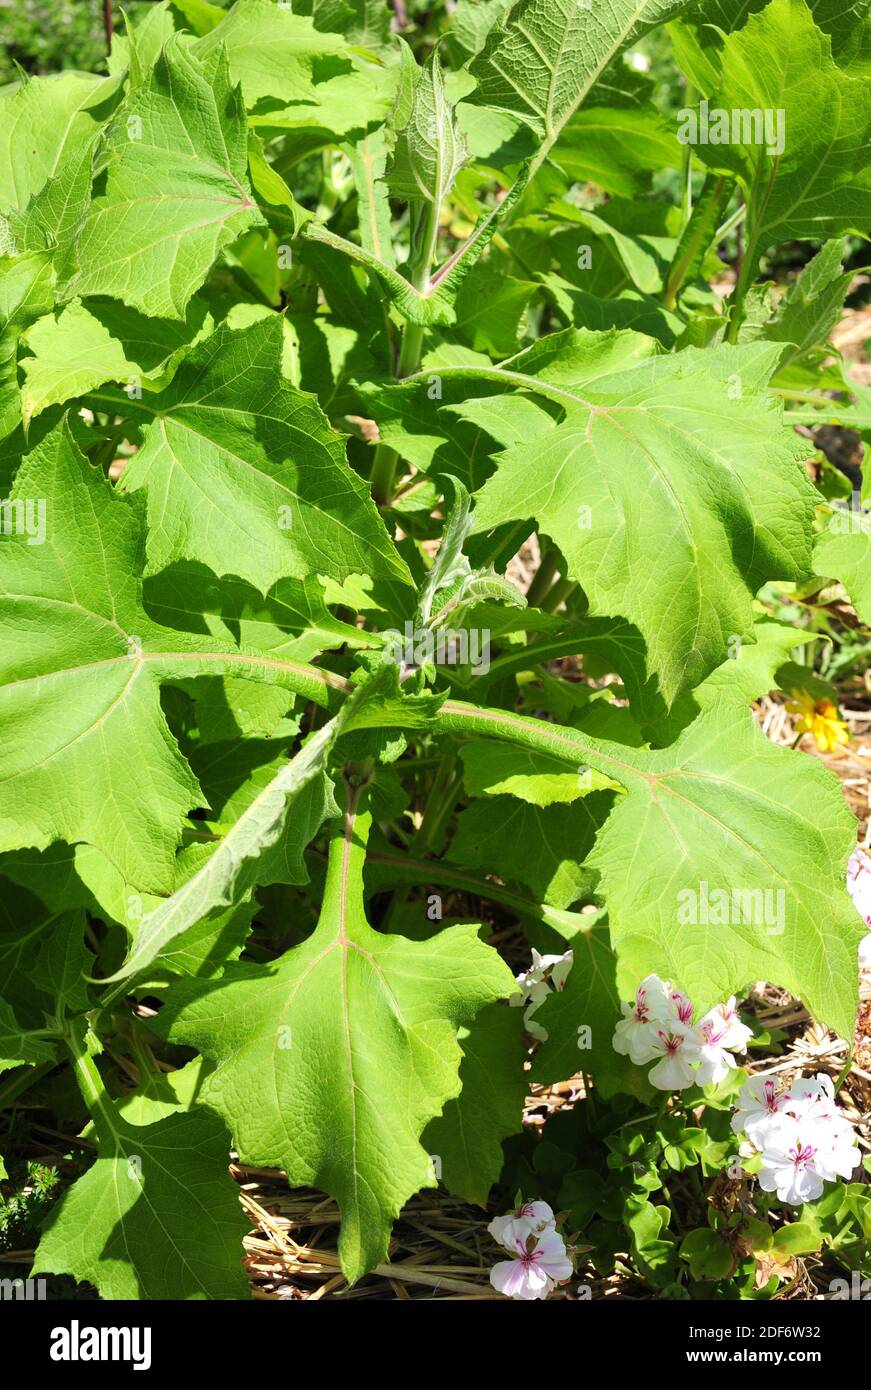 Yacon or Peruvian ground apple (Smallanthus sonchifolius) is a perennial herb native to Andes. Its tuberous roots are edible. Stock Photo